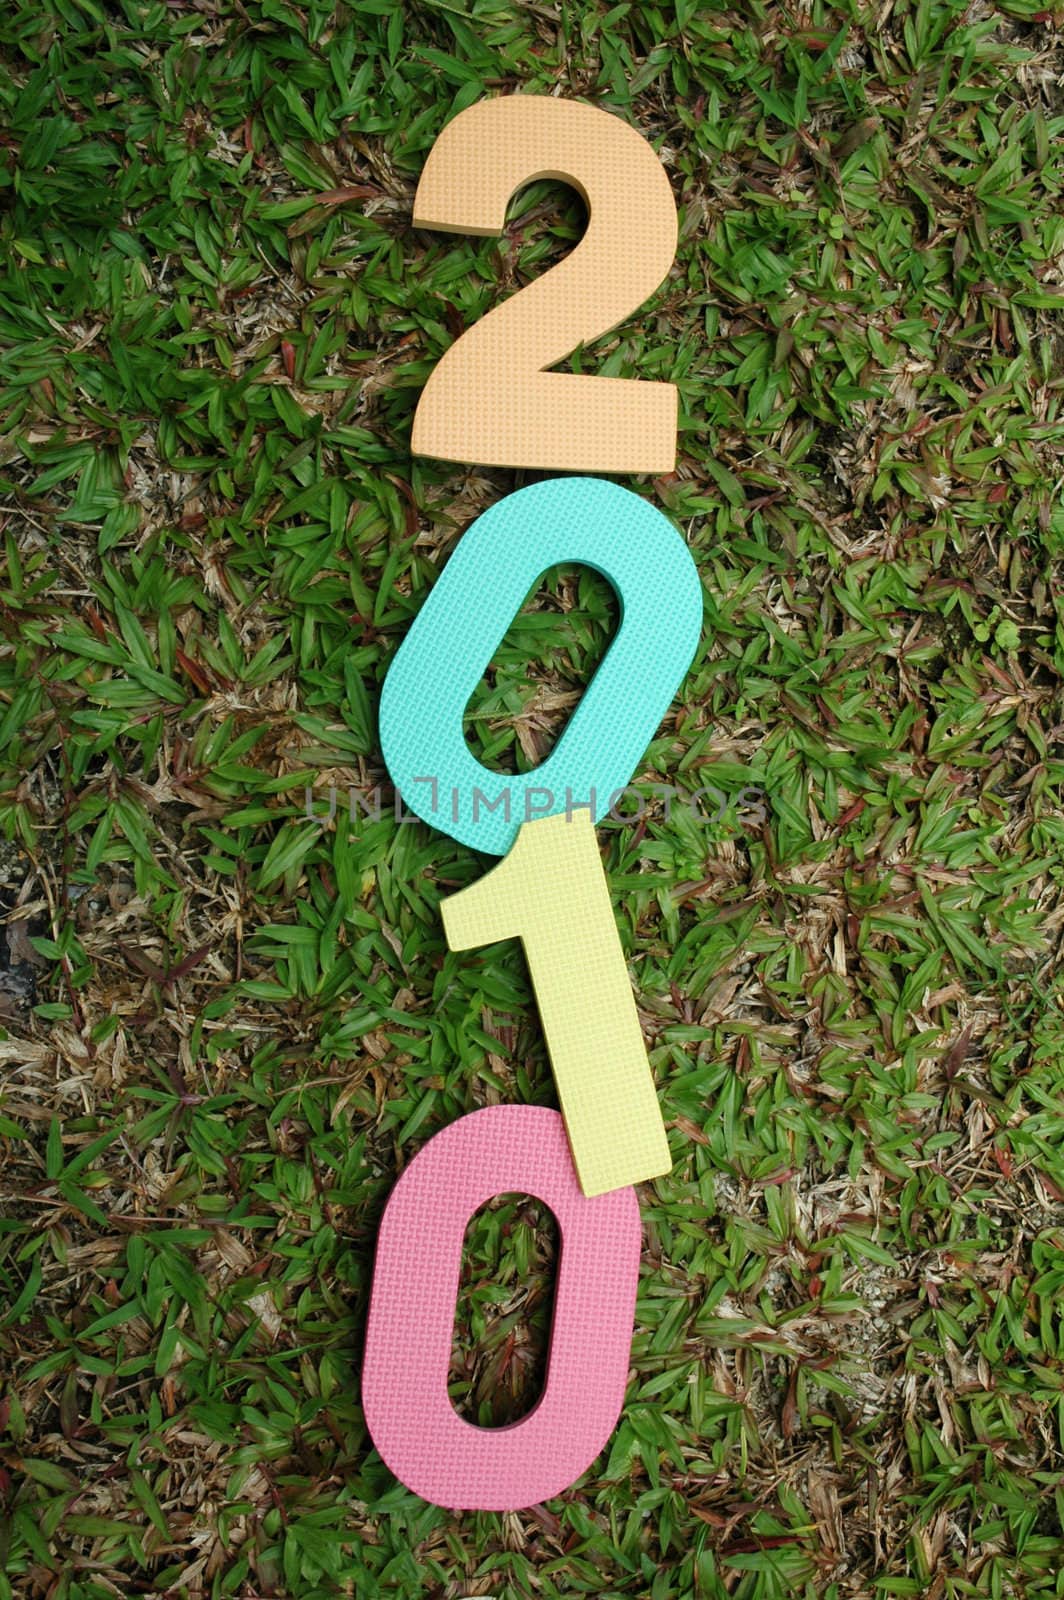 Colorful textured new year 2010 on green grass background